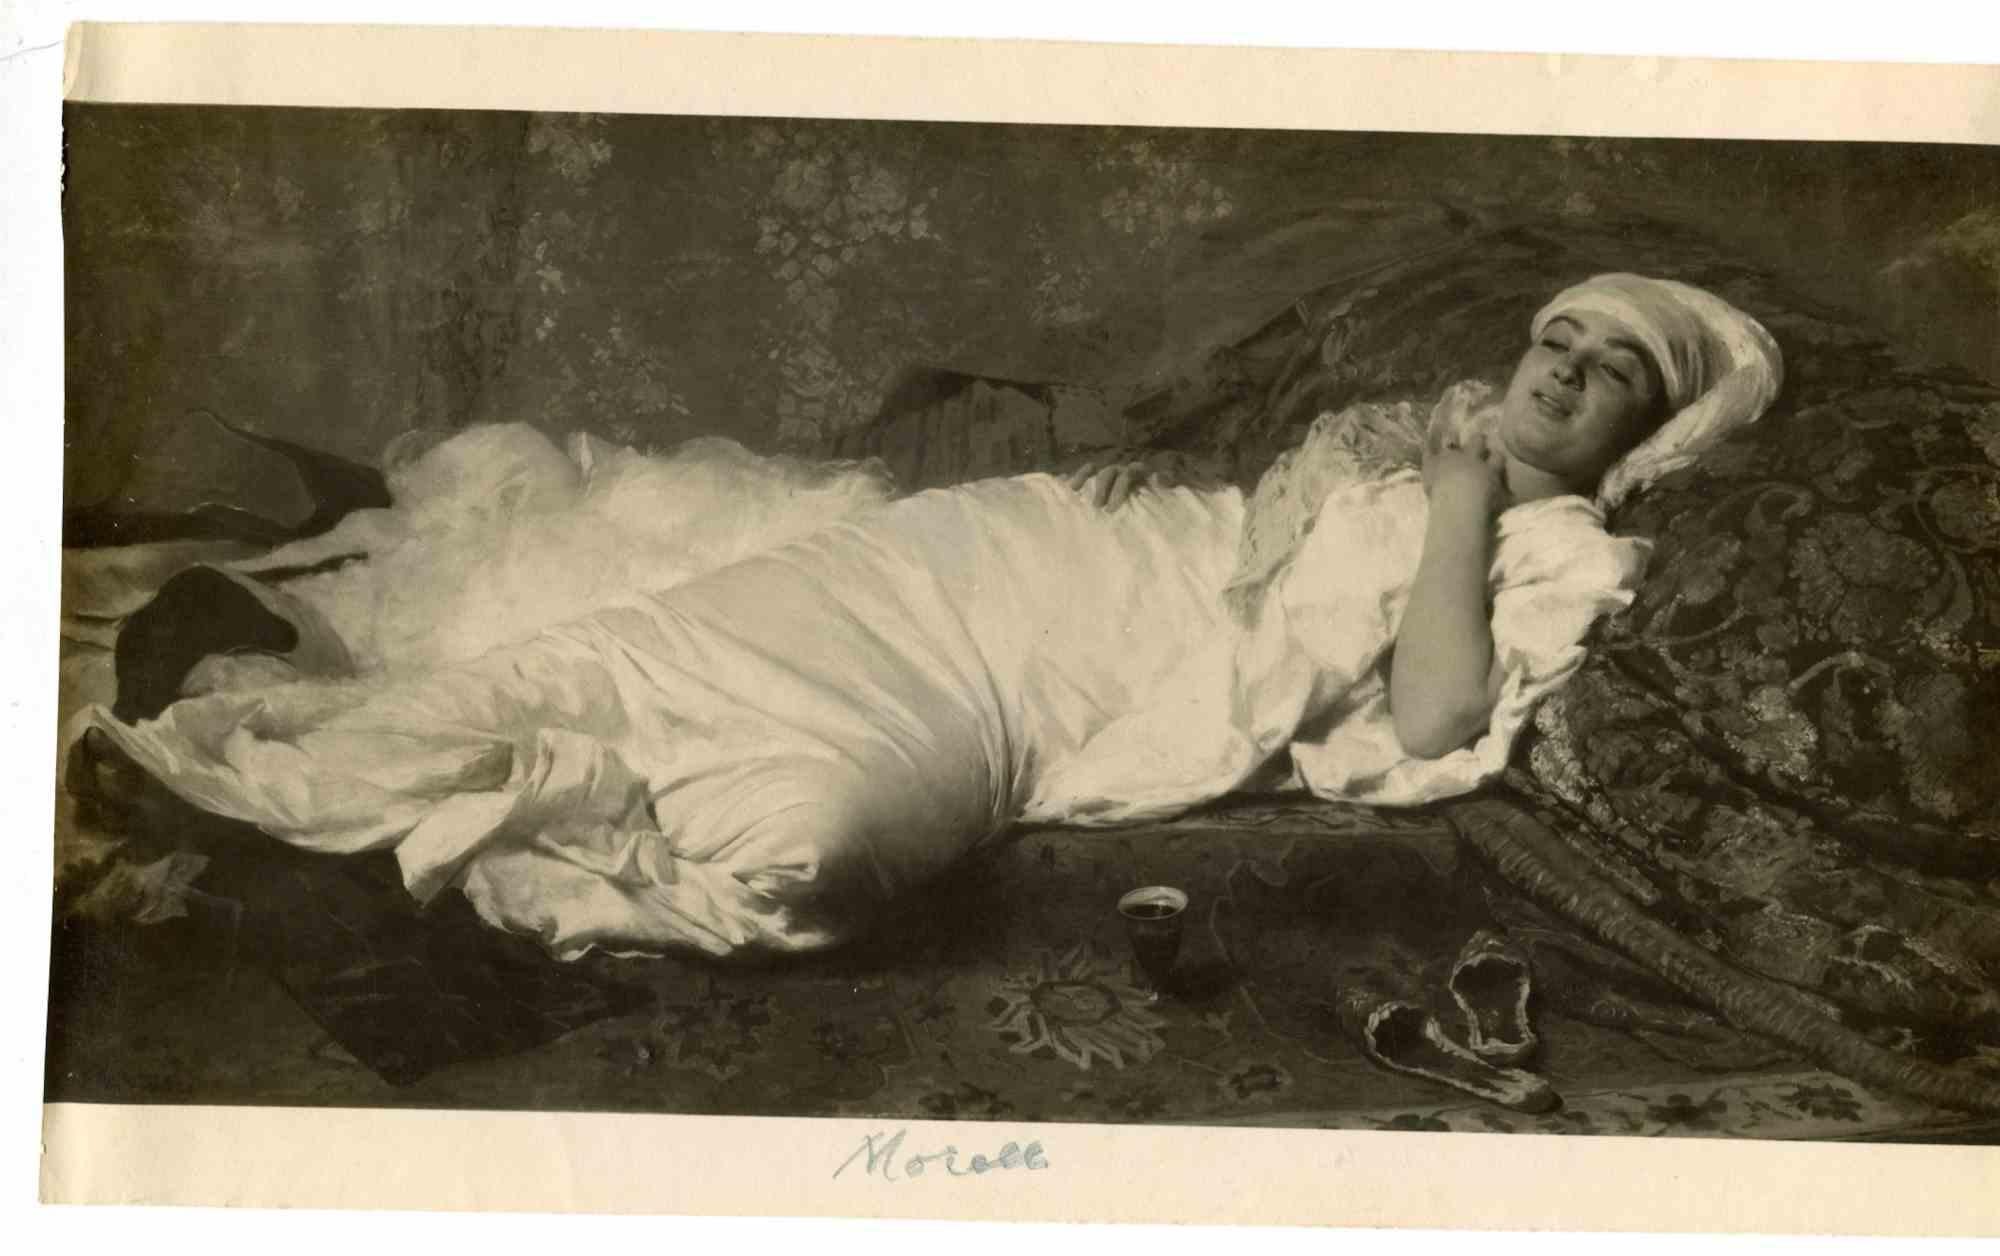 Unknown Figurative Photograph - Vintage Photo of Painting by Domenico Morelli - Early 20th Century